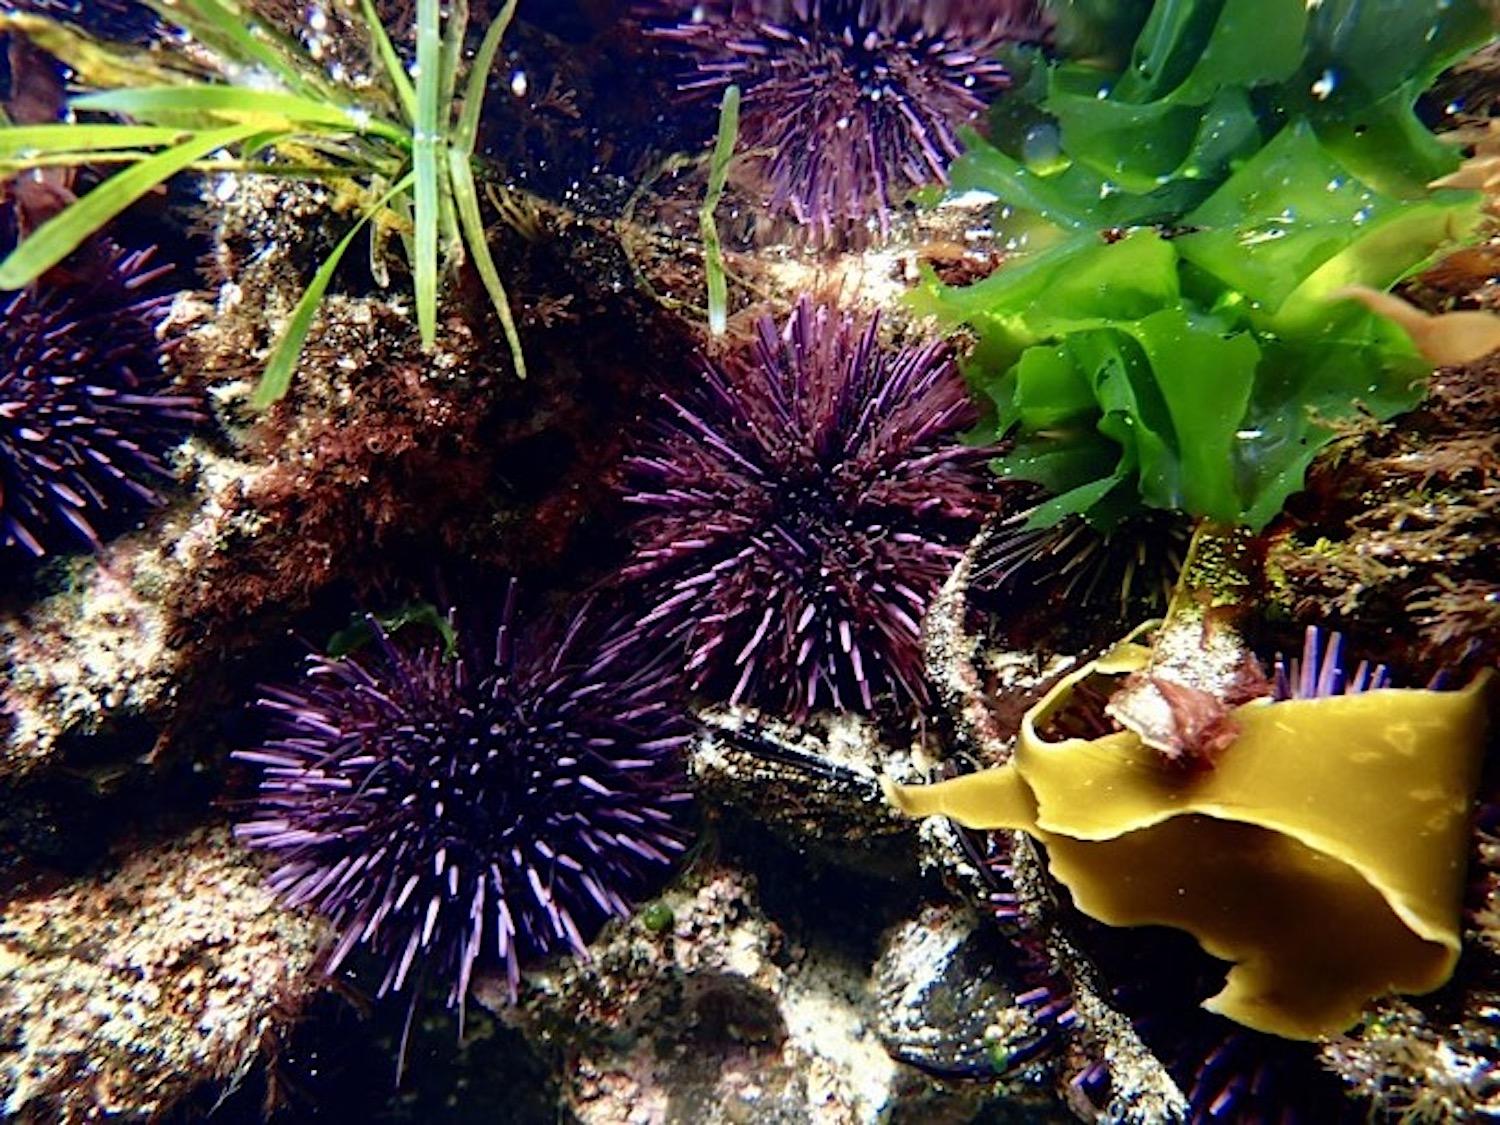 Up Close And Personal With Tidepool Critters On The Olympic Coast